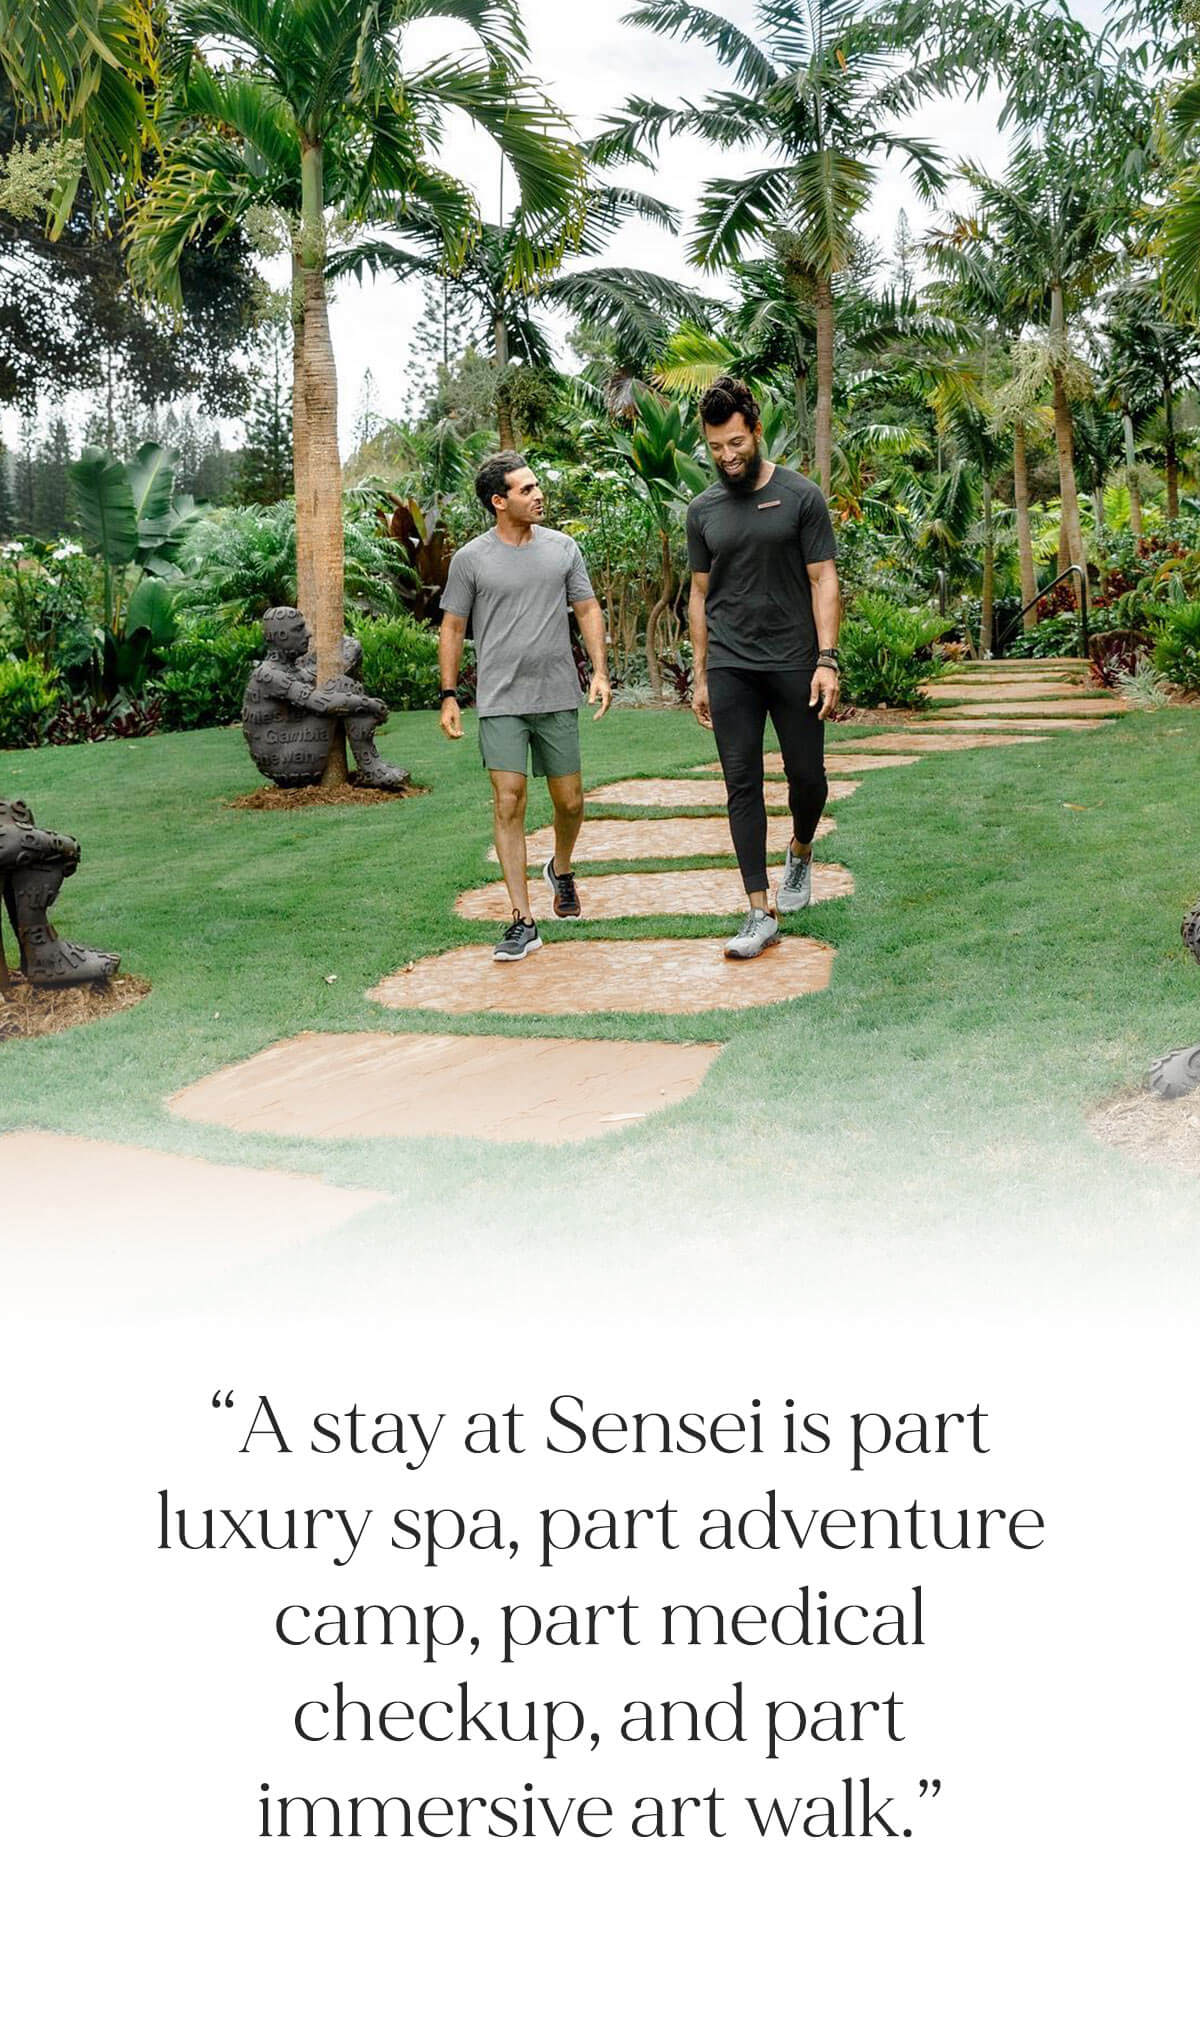 Pull quote written on the image, Sensey’s newsletter